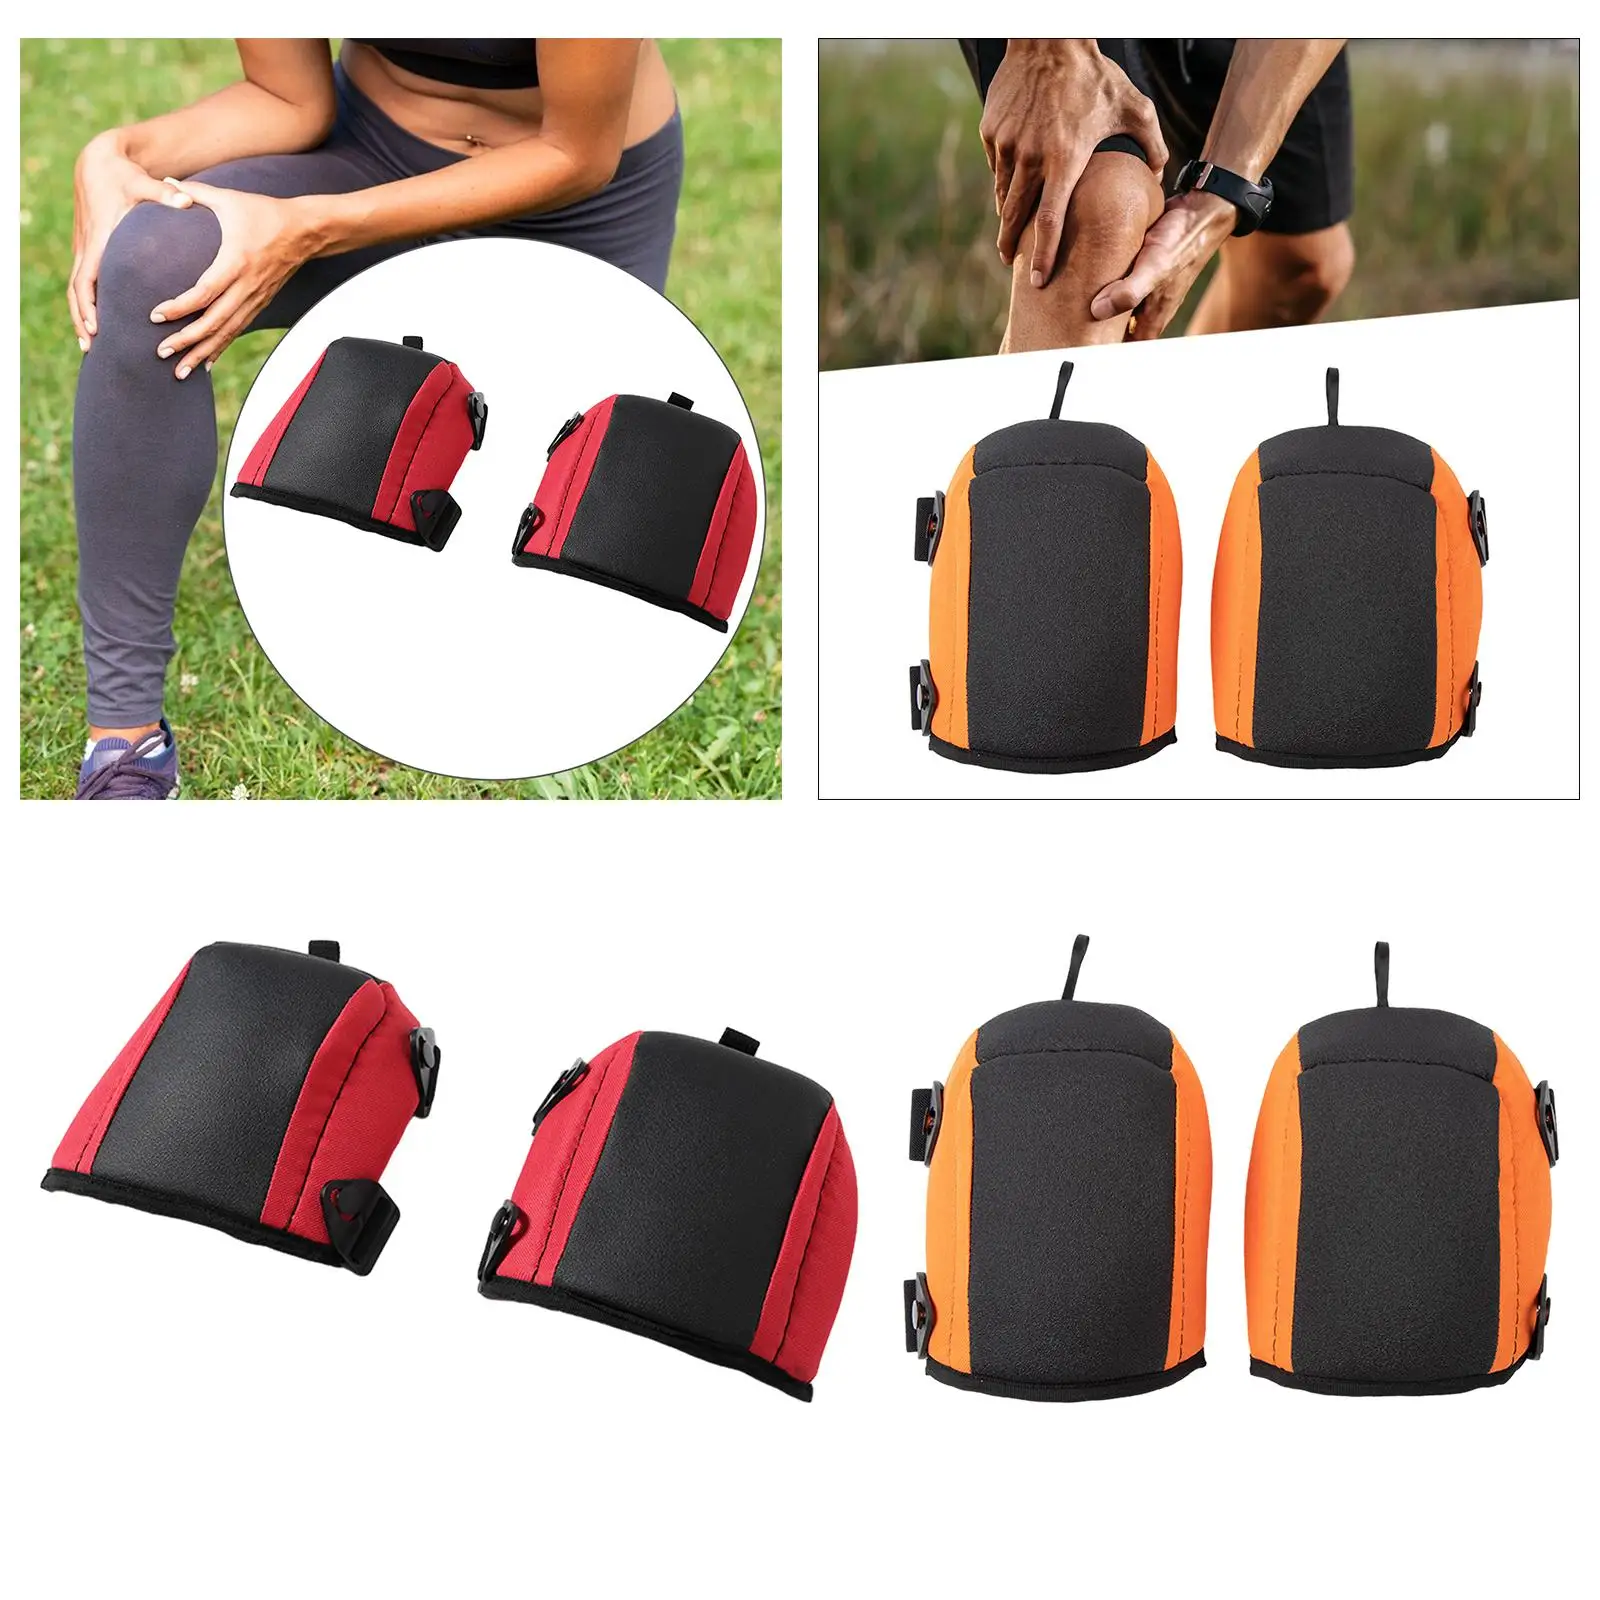 Gardening Knee Pads Knee Protector Kneeling Pads Anti Slip Cover Adjustable Straps Thick Soft Padding for Carpentry Sturdy